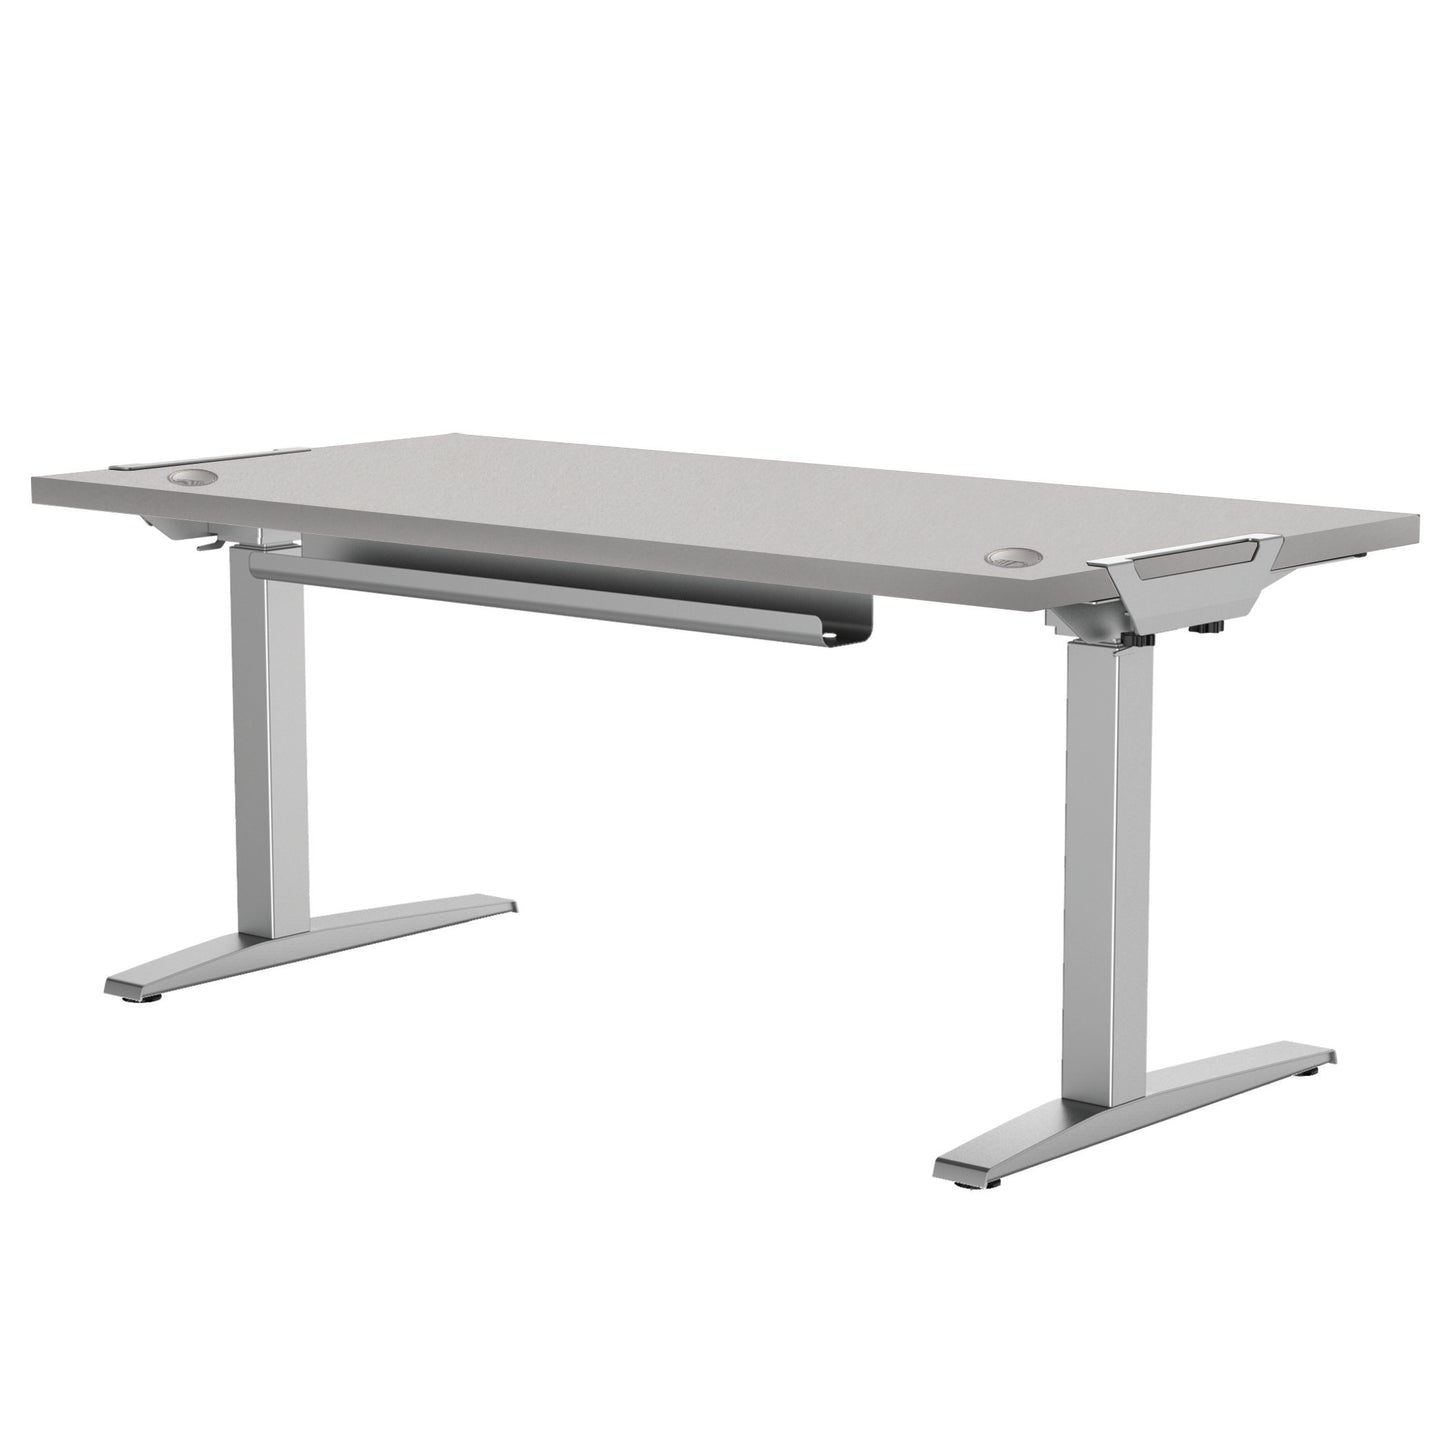 BUY FELOOWES Levado Height Adjustable Desk FREE SHIPPING 8949401. Standing desk/sit stand desk/stand up desk available with grey table tops.